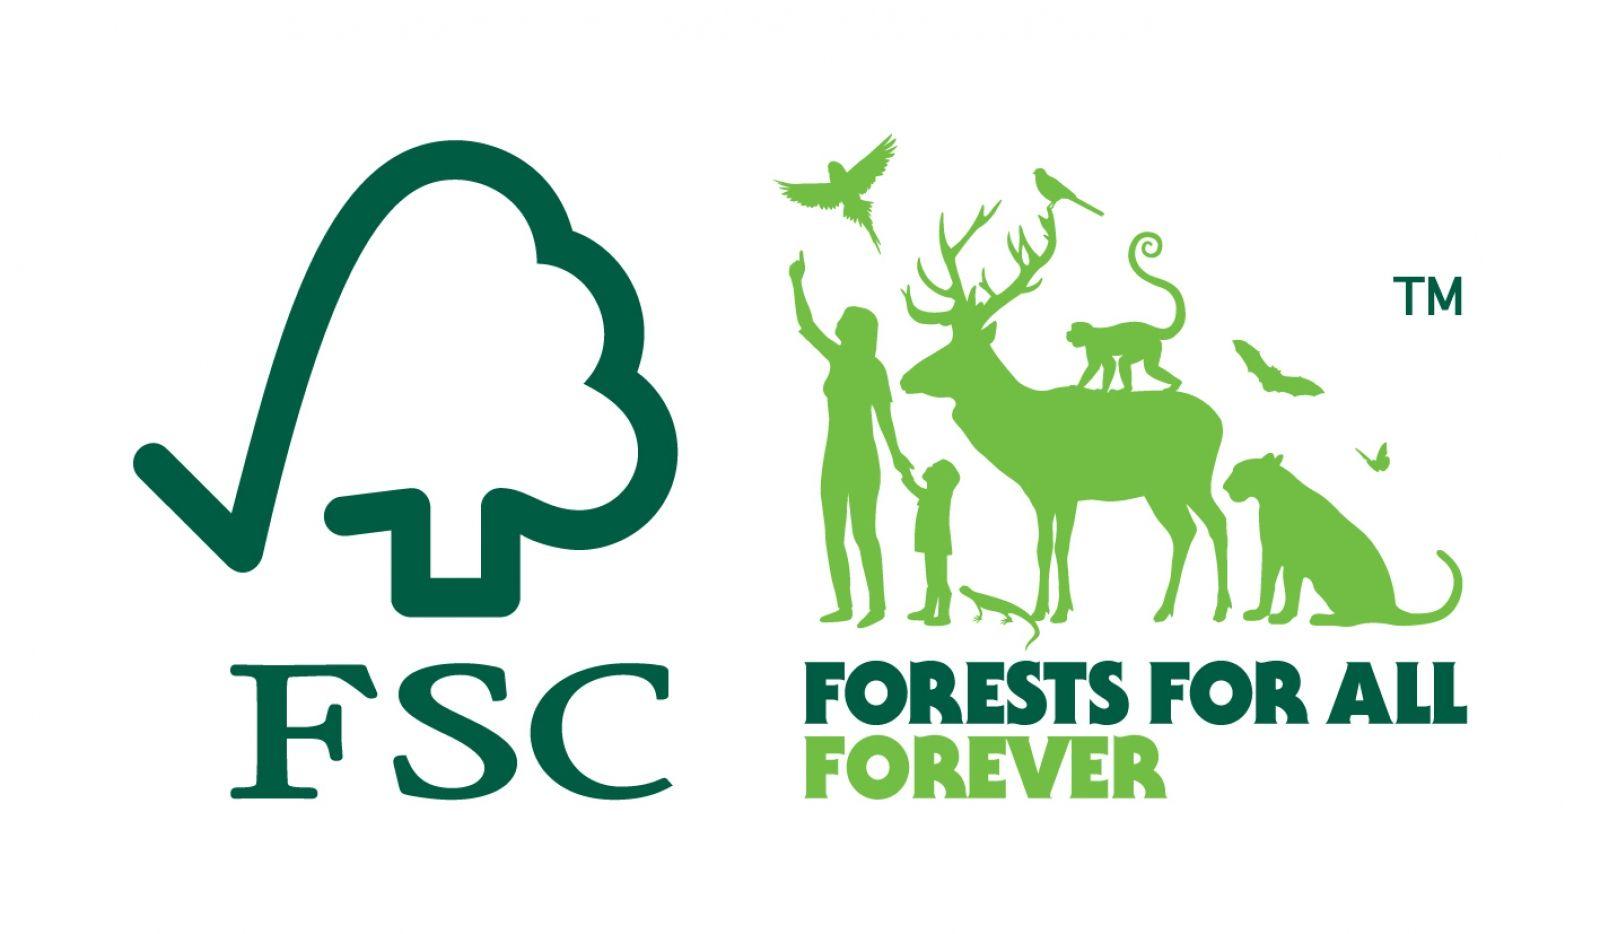 Forestry Logo - FSC® launches new global brand: Forests For All Forever (30/04/2015 ...